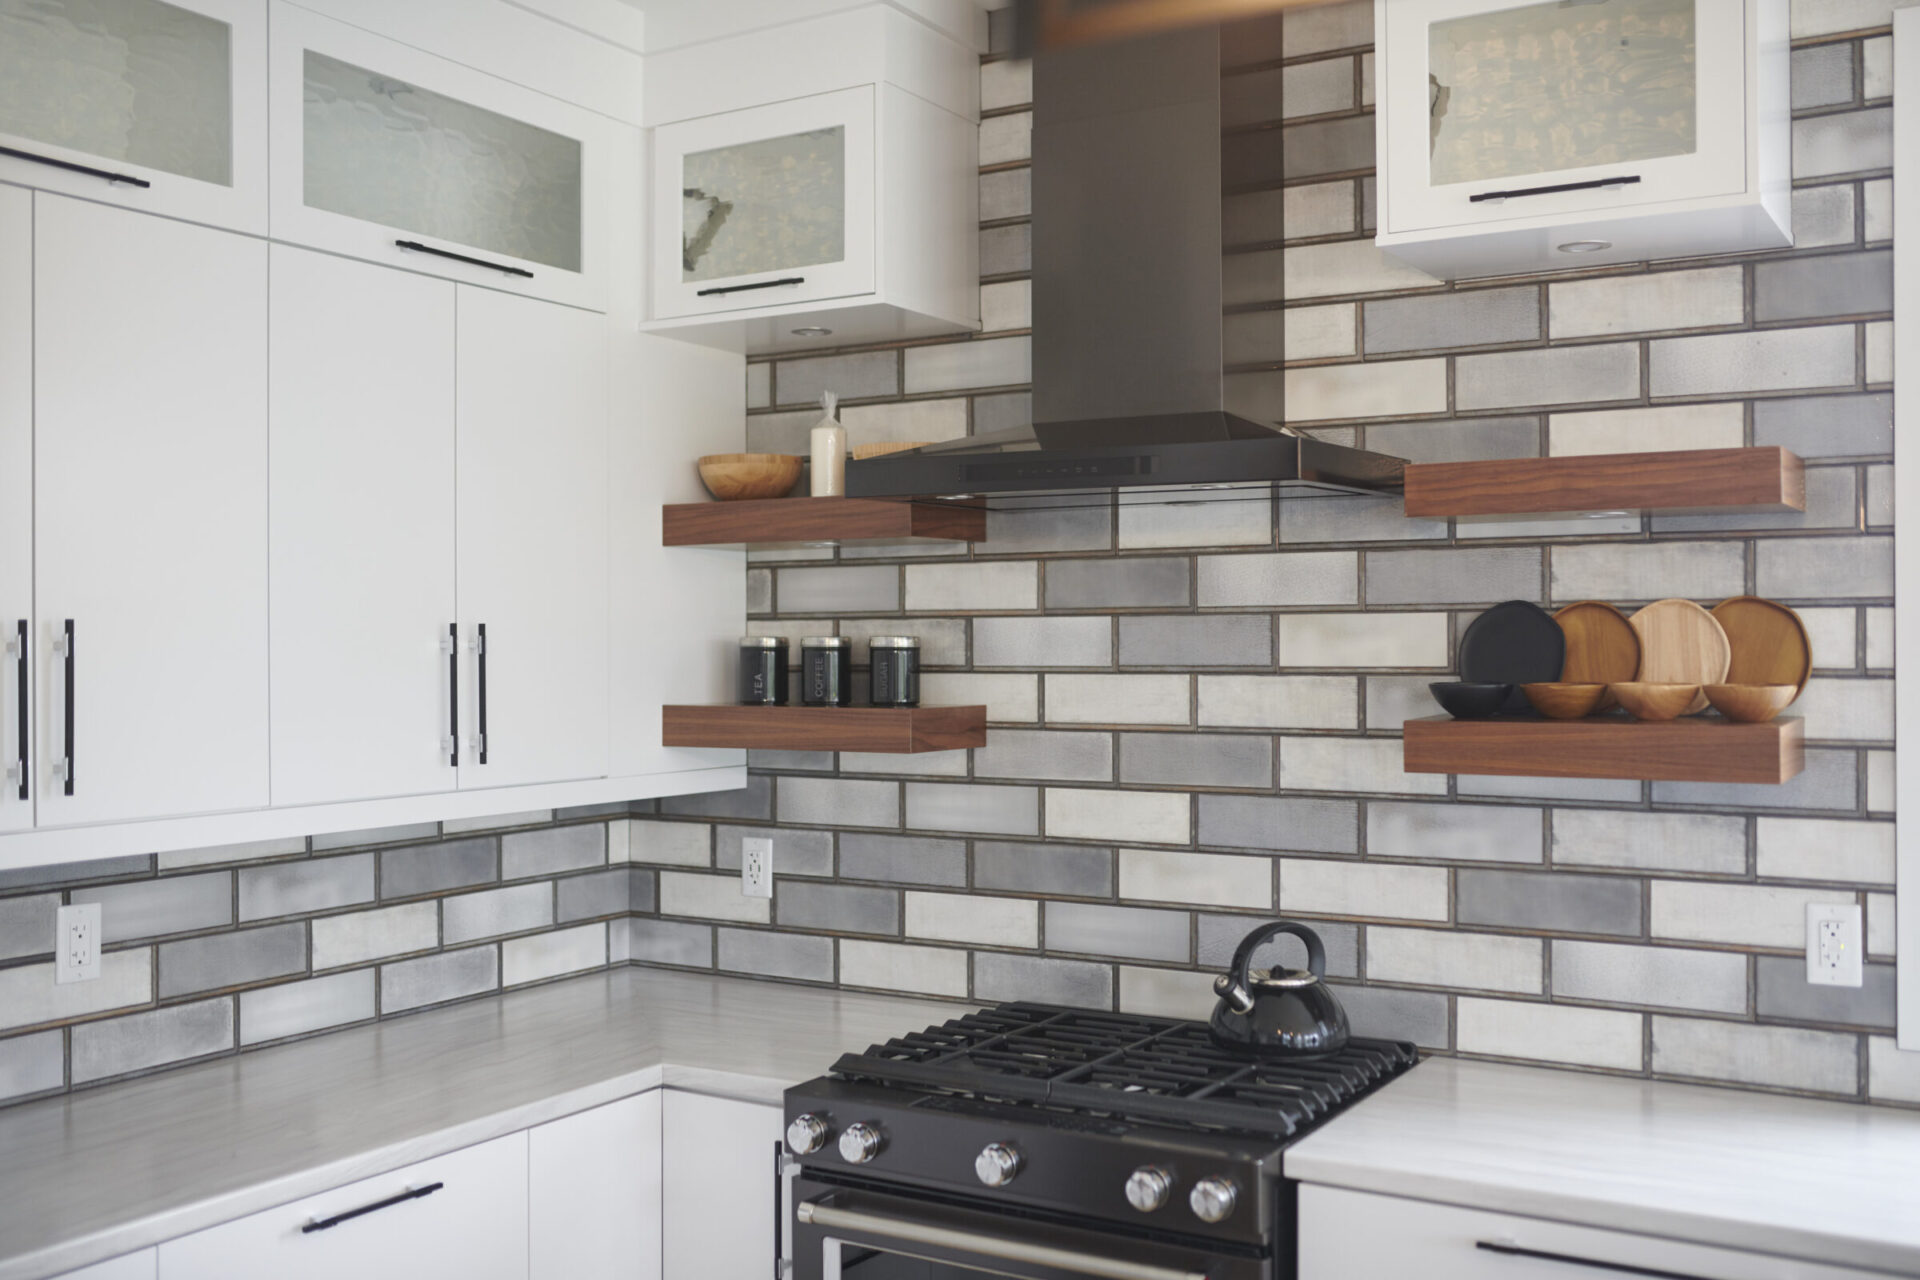 A modern kitchen with white cabinets, stainless steel appliances, gray backsplash tiles, wood shelves with utensils, and a black stove with a kettle.